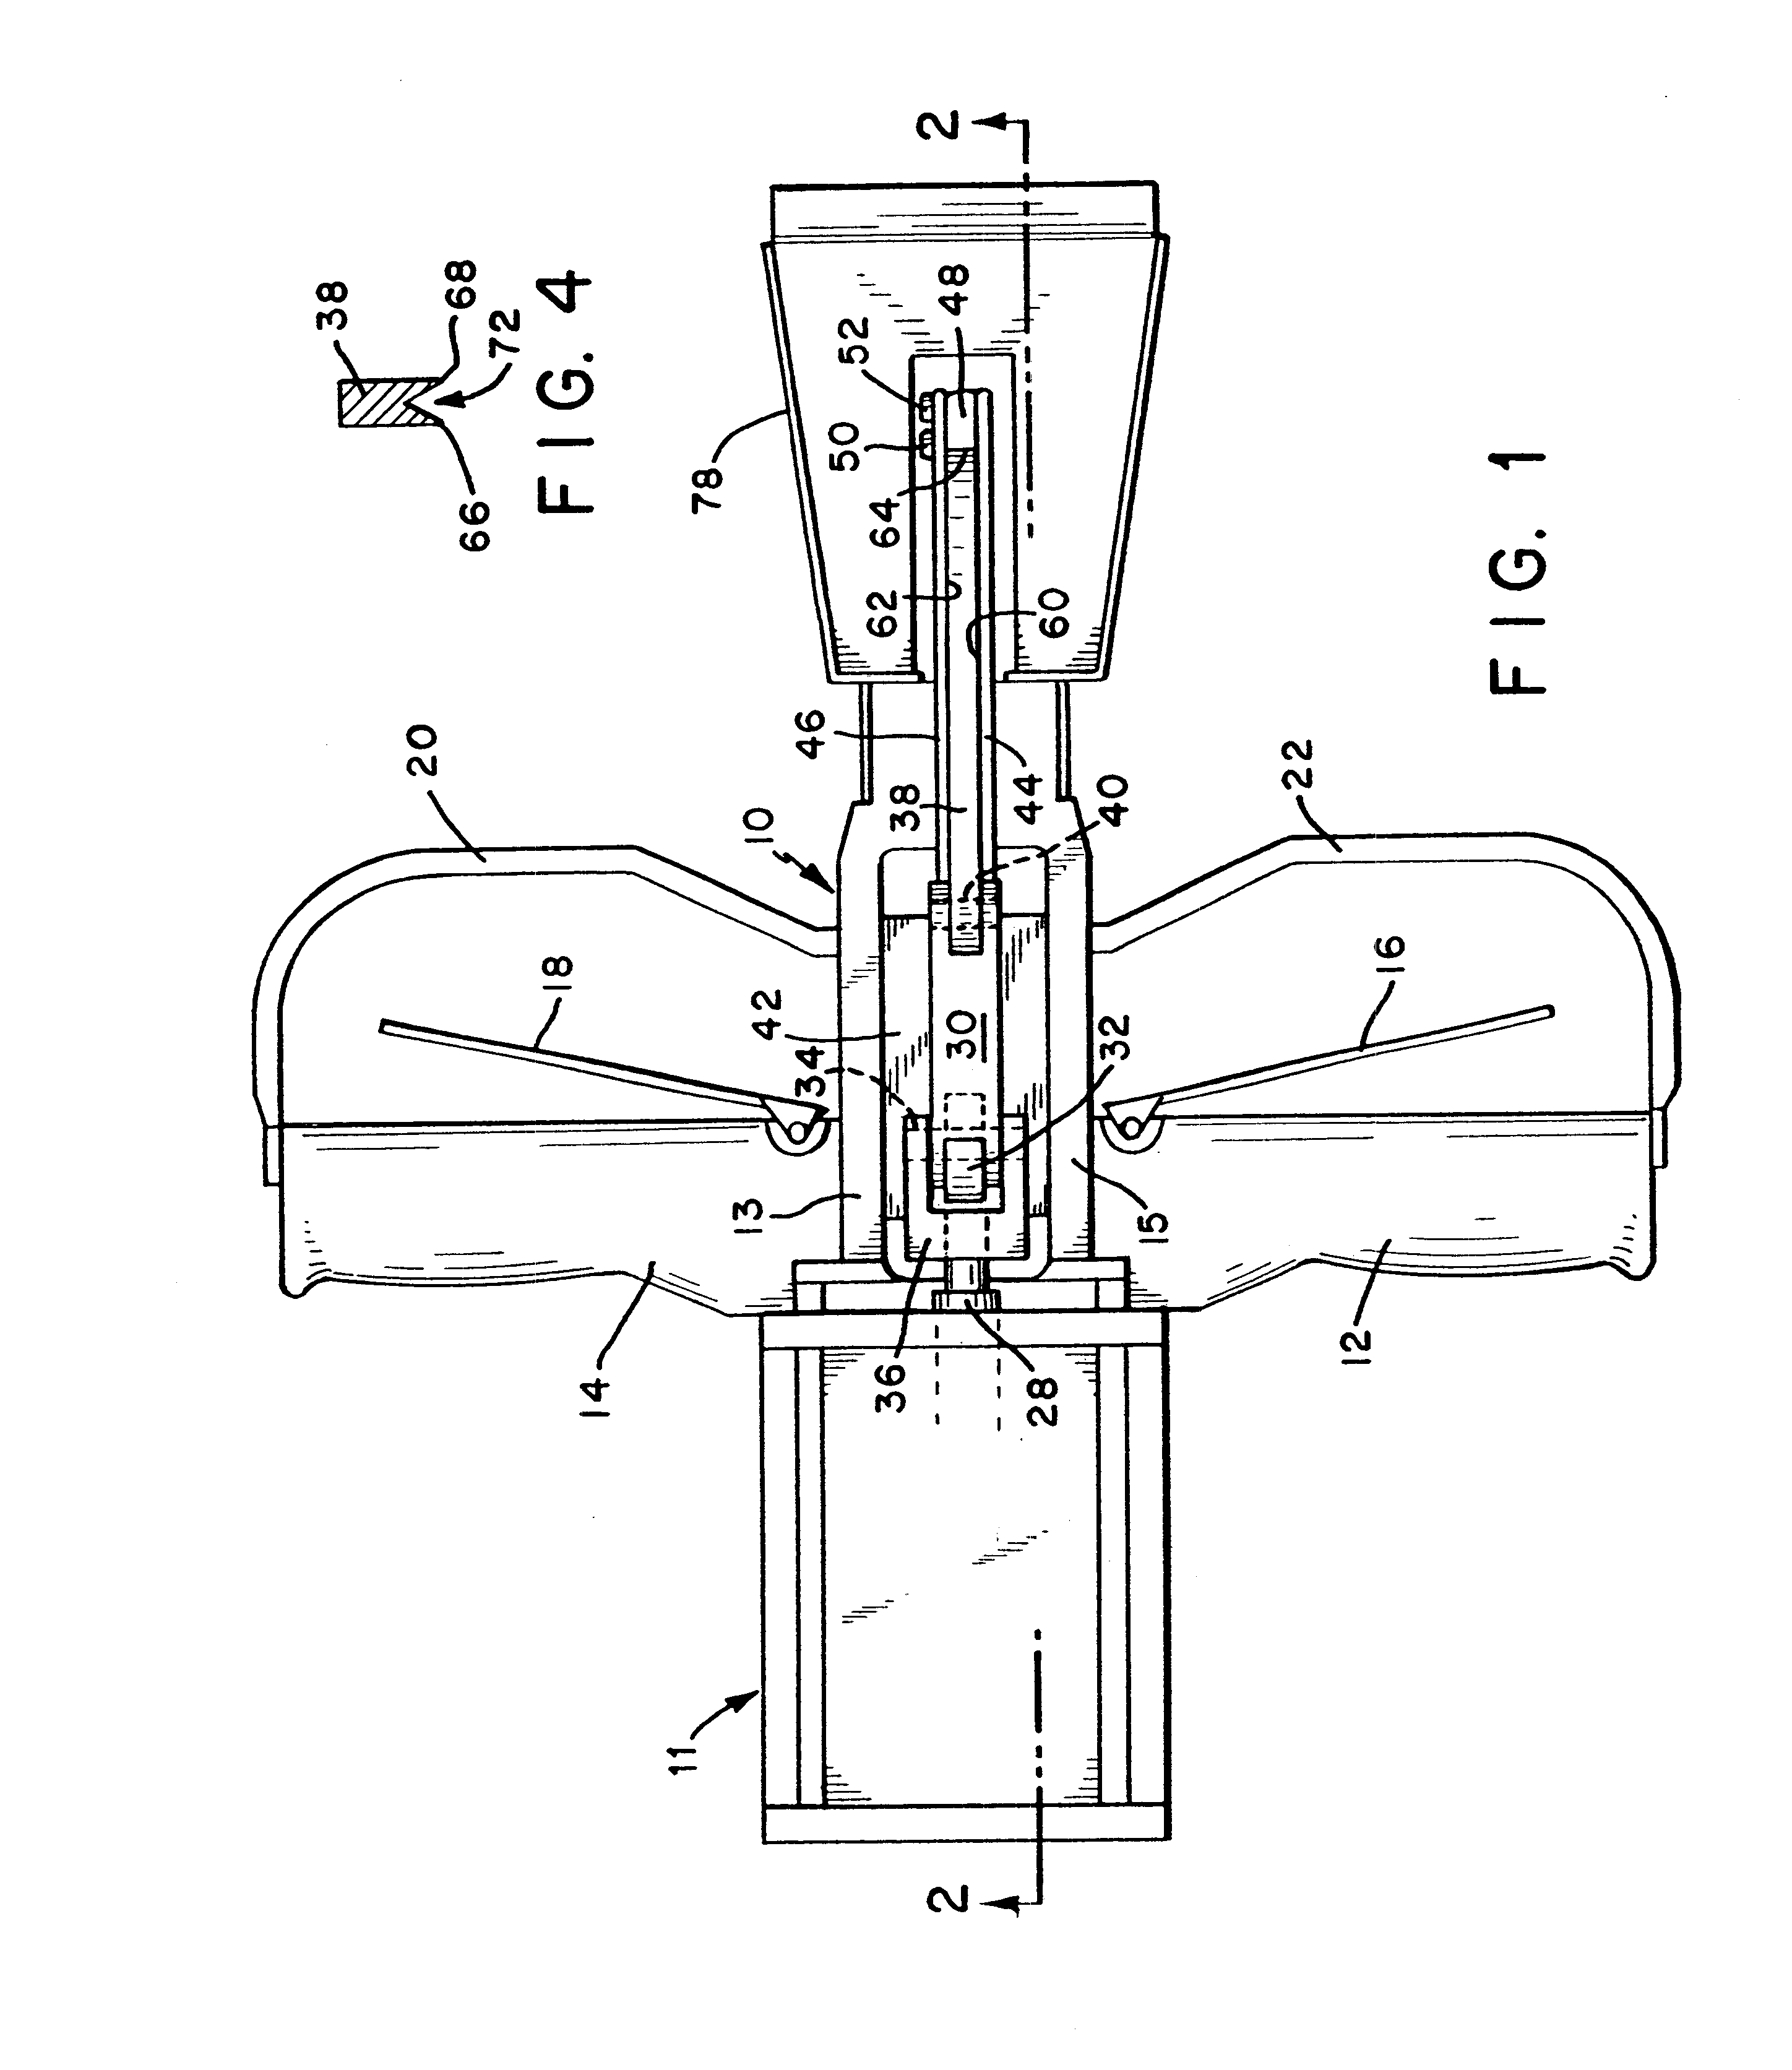 Toe web cutter with stationary blade unit